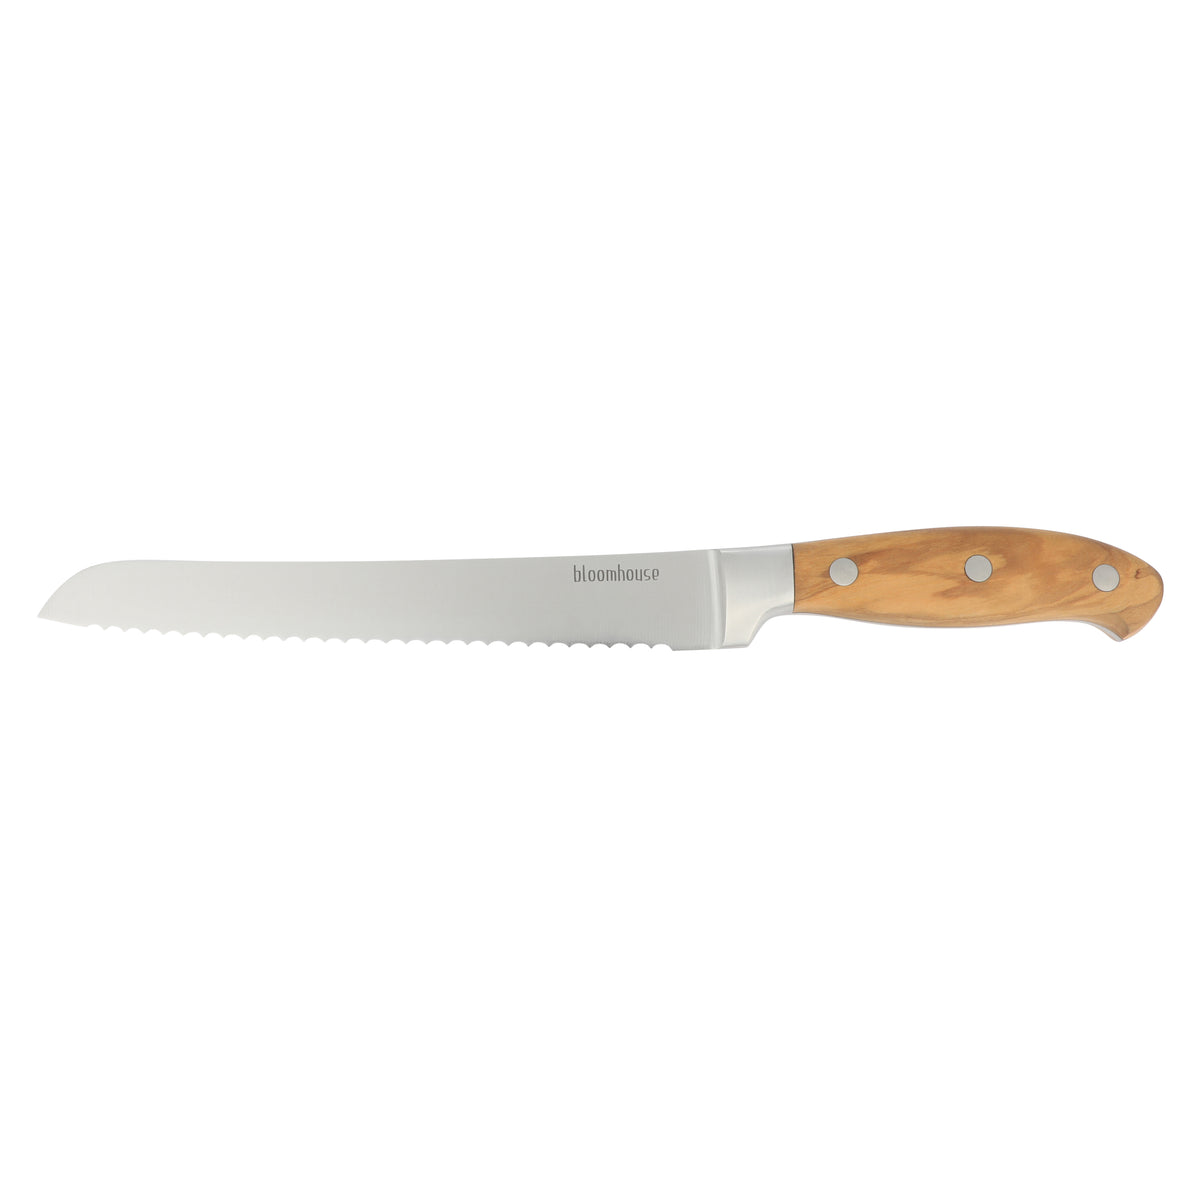 Bloomhouse 8 Inch German Steel Chef's Knife w/ Olive Wood Forged Handle